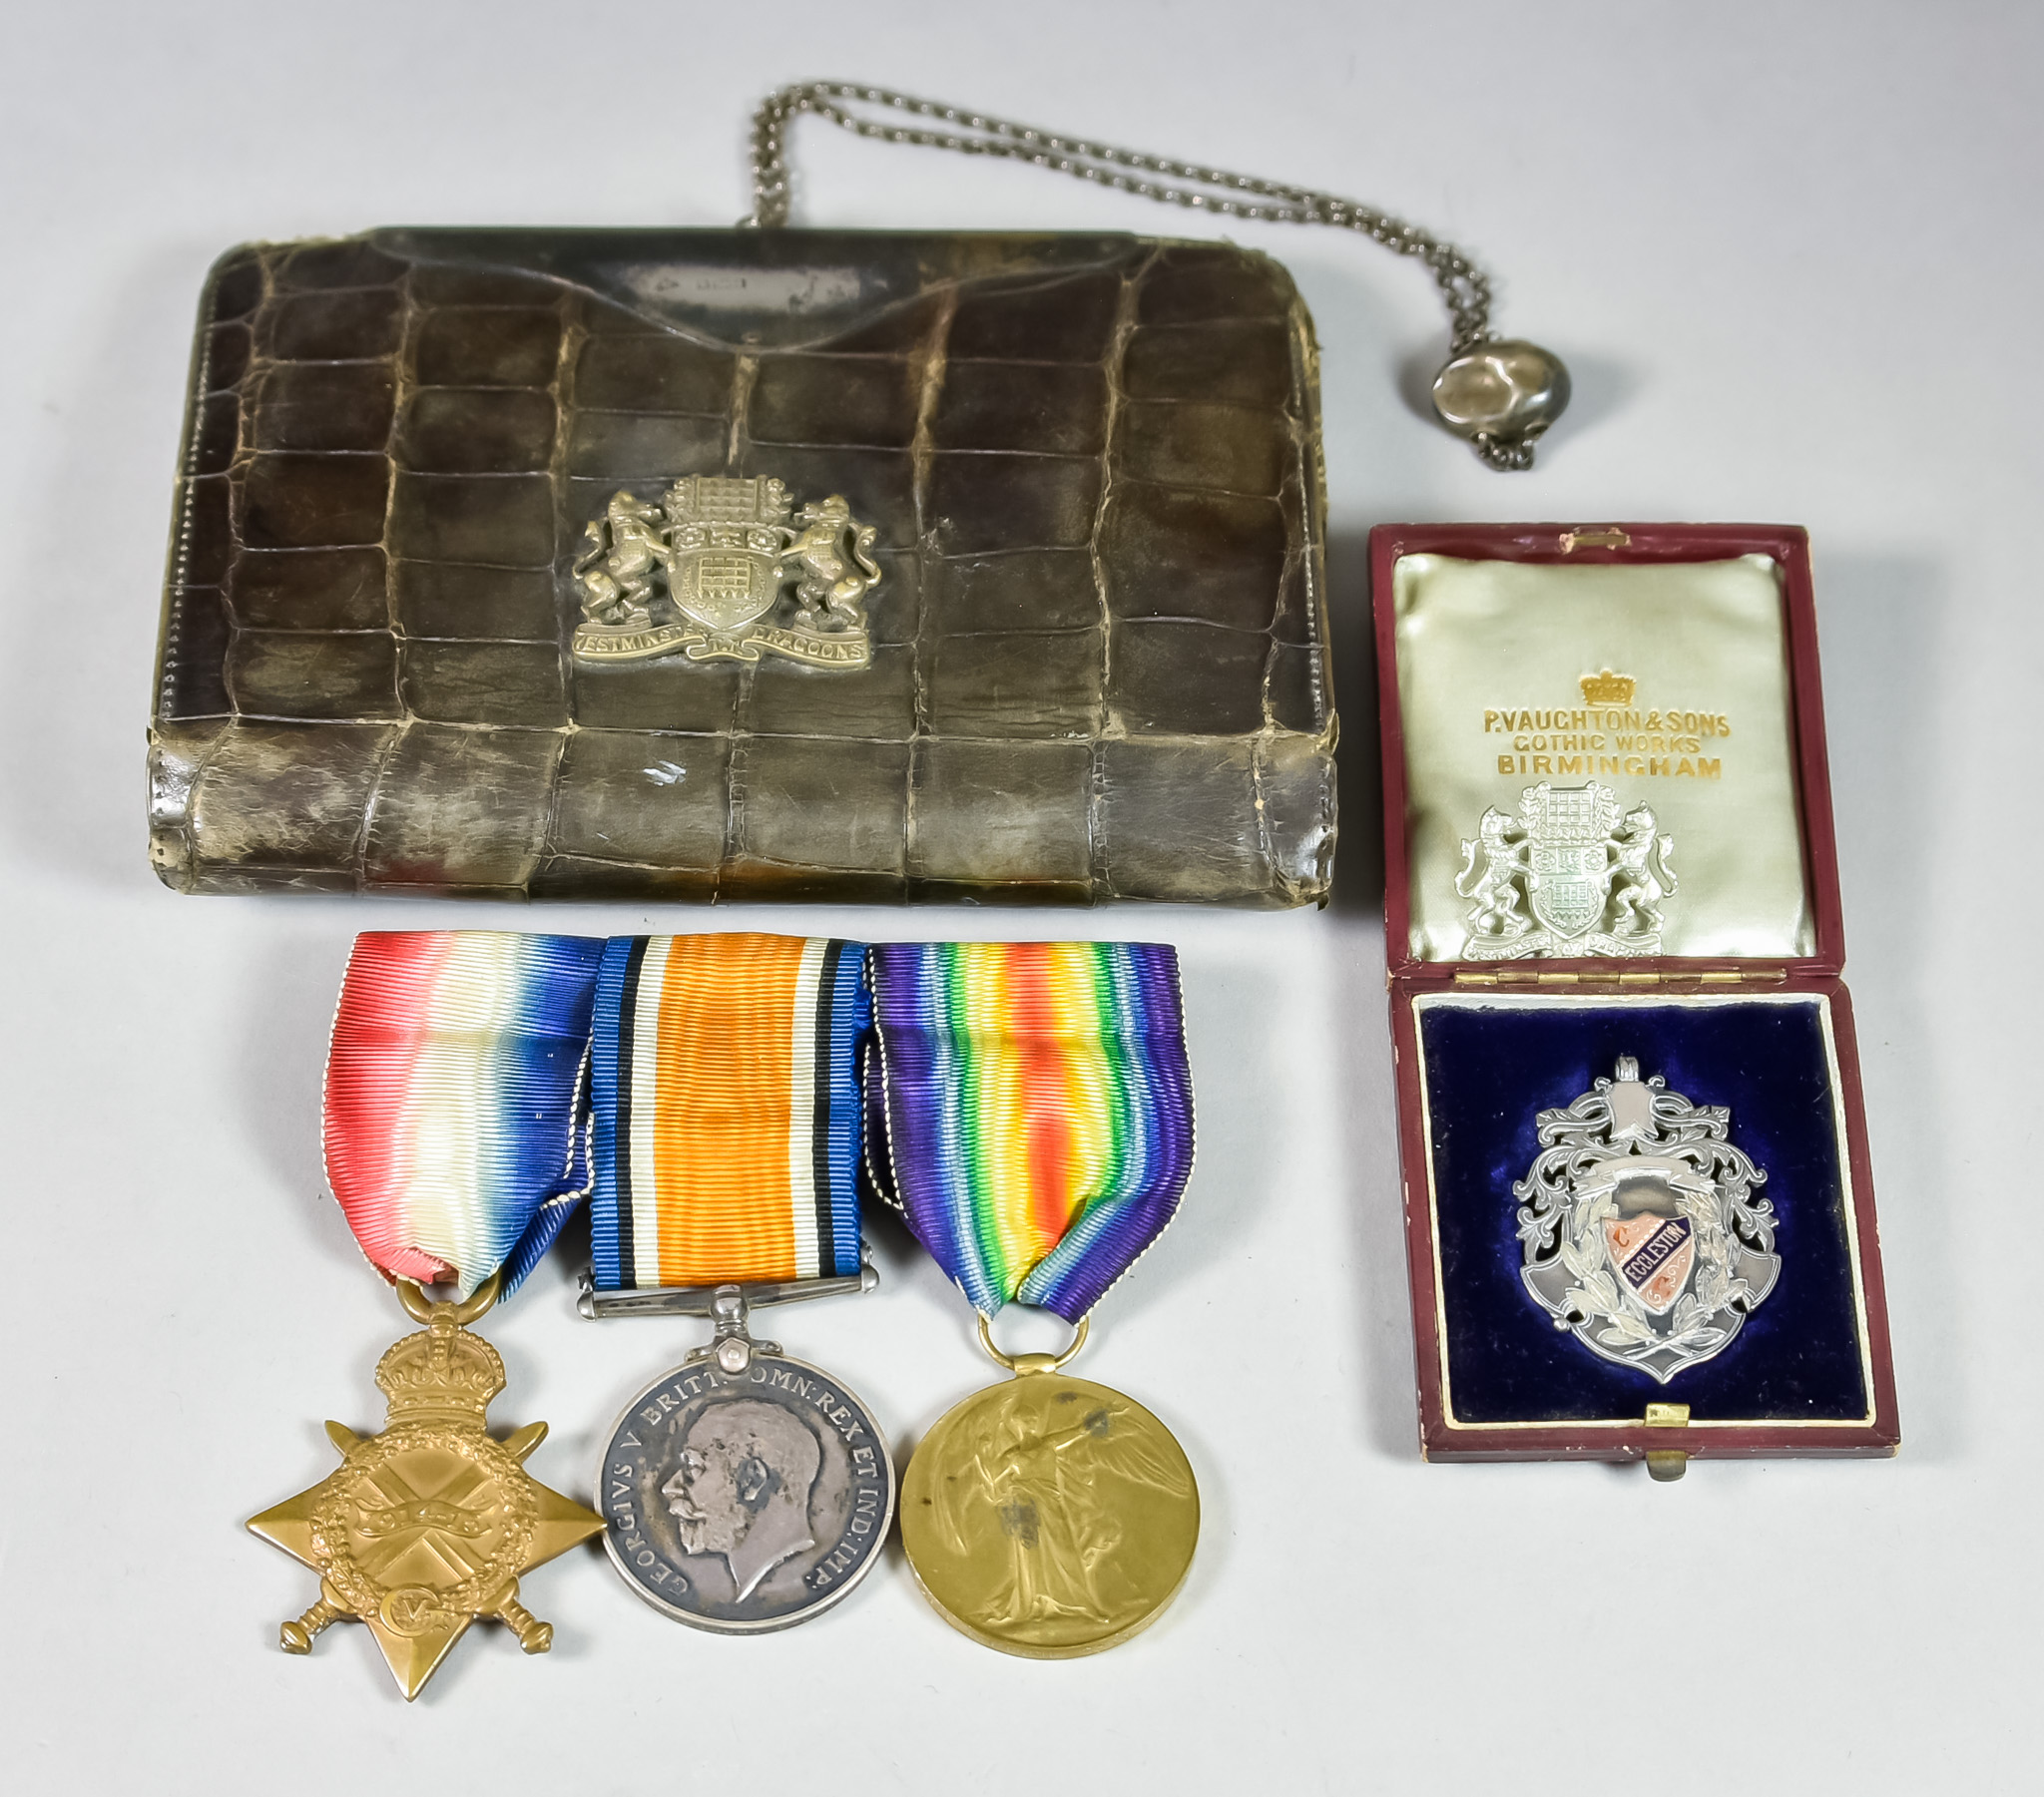 A Group of Three Medals, and a small quantity and ephemera relating to Earnest Finch of the